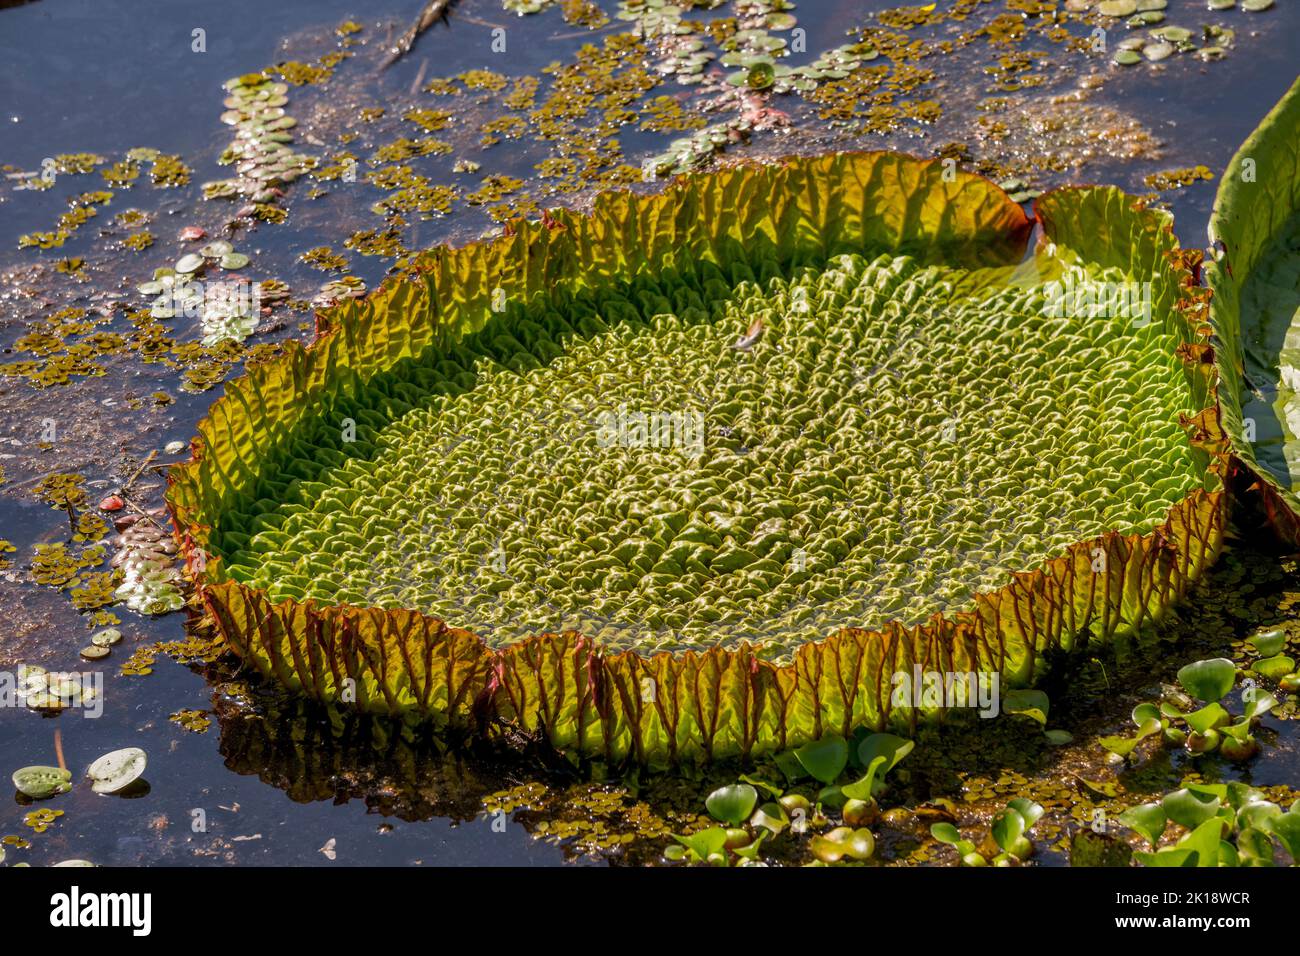 View of Victoria amazonica giant water lily leaf with spiny edges at Porto Jofre in the northern Pantanal, Mato Grosso province in Brazil. Stock Photo